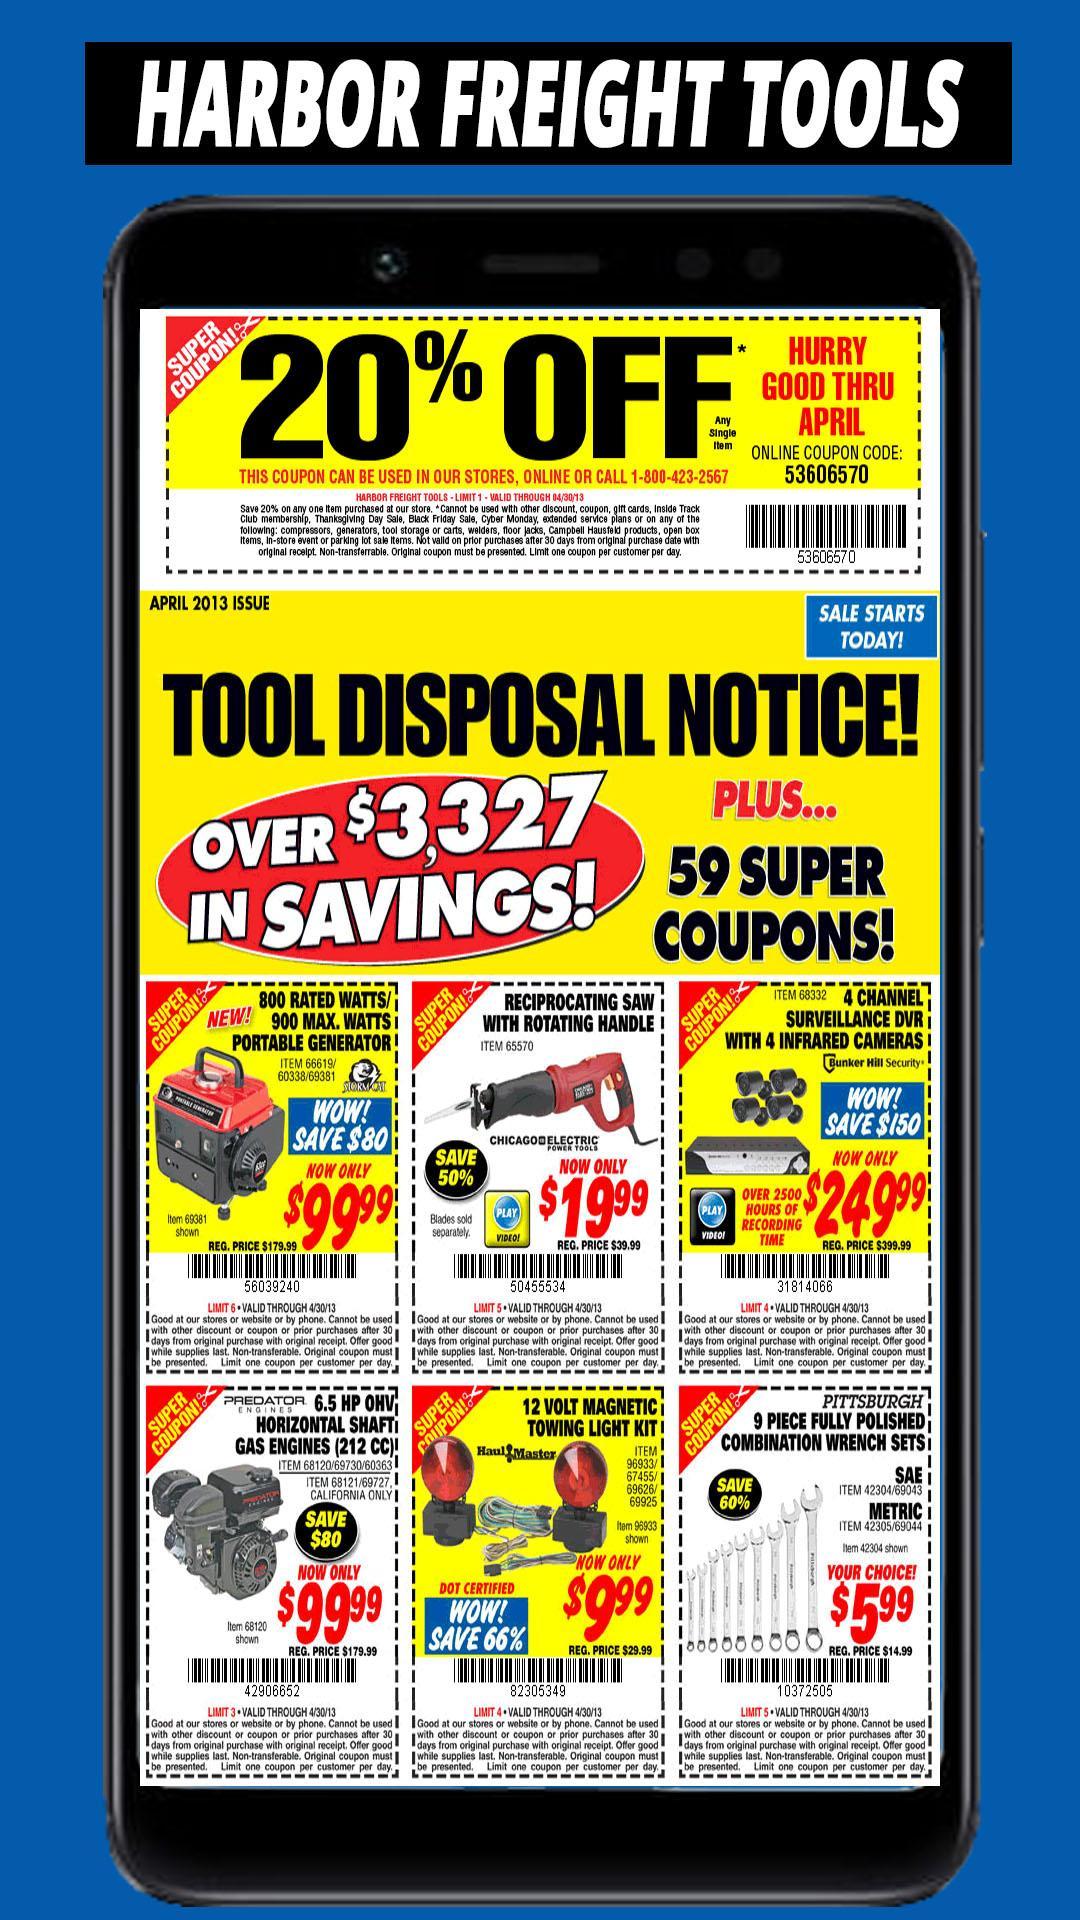 Coupons For Harbor Freight Tools Promo Codes For Android Apk Download